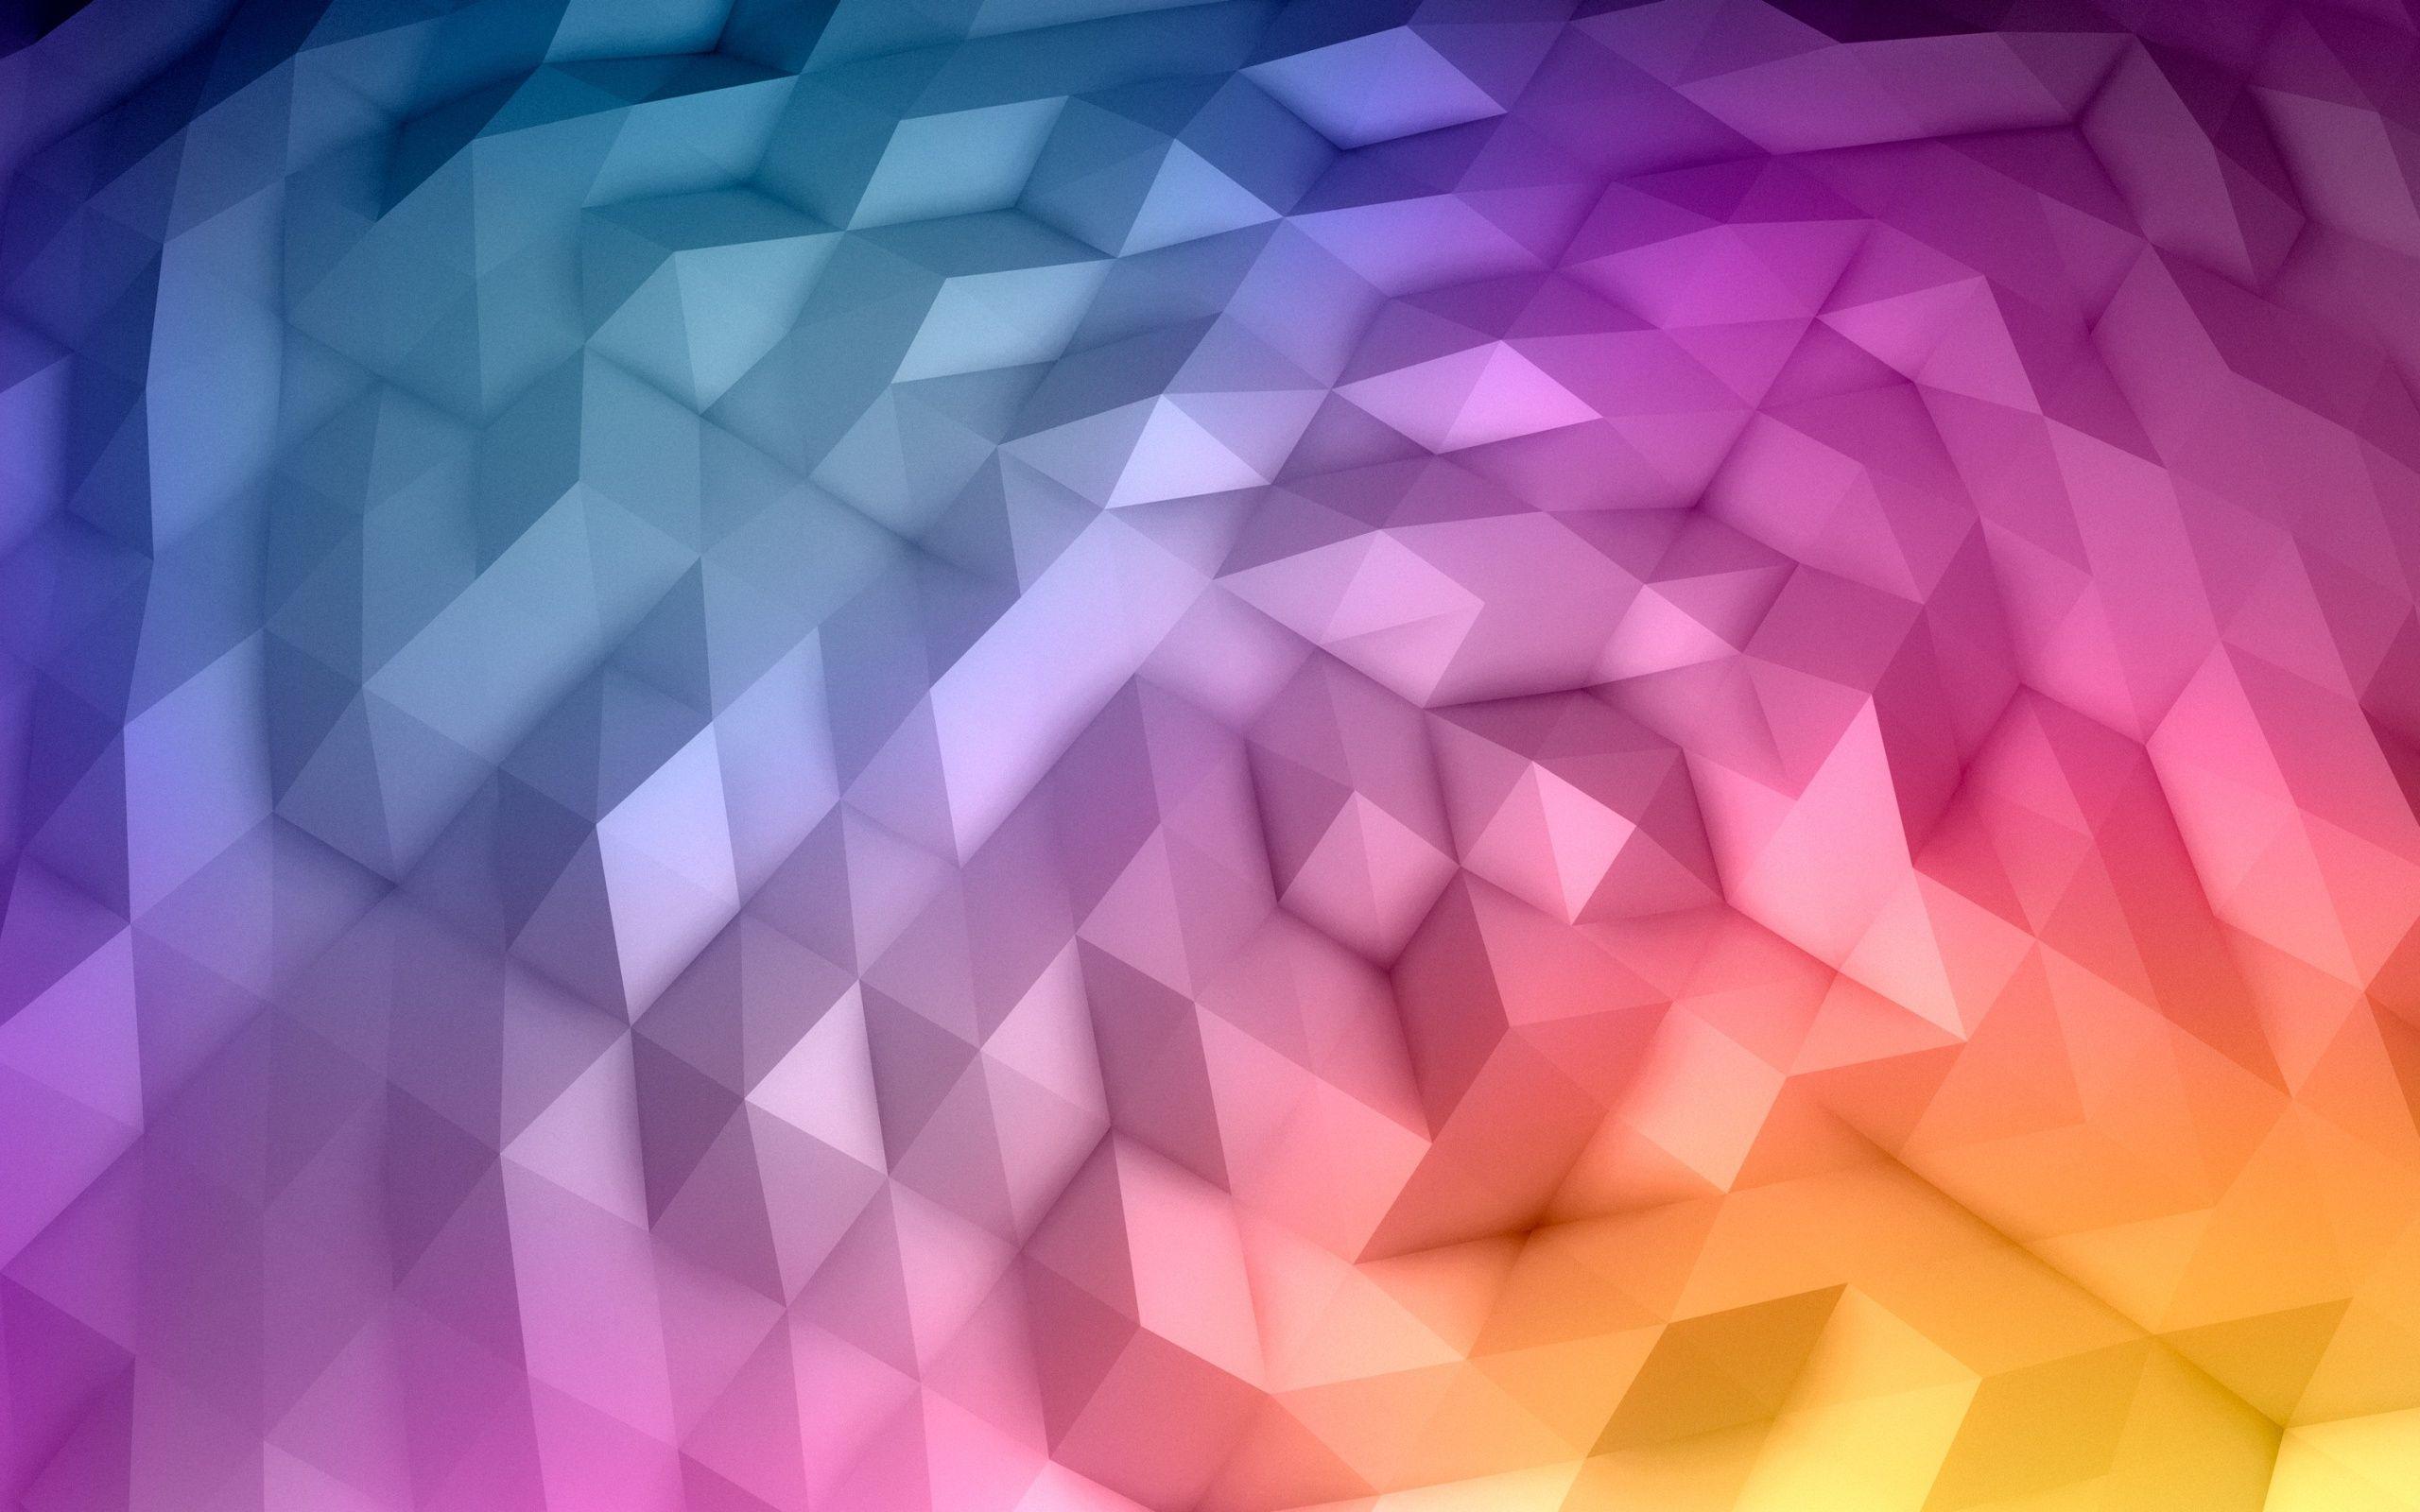 Free Solid Wallpaper, 39++ Solid Wallpaper and Photo In HQFX